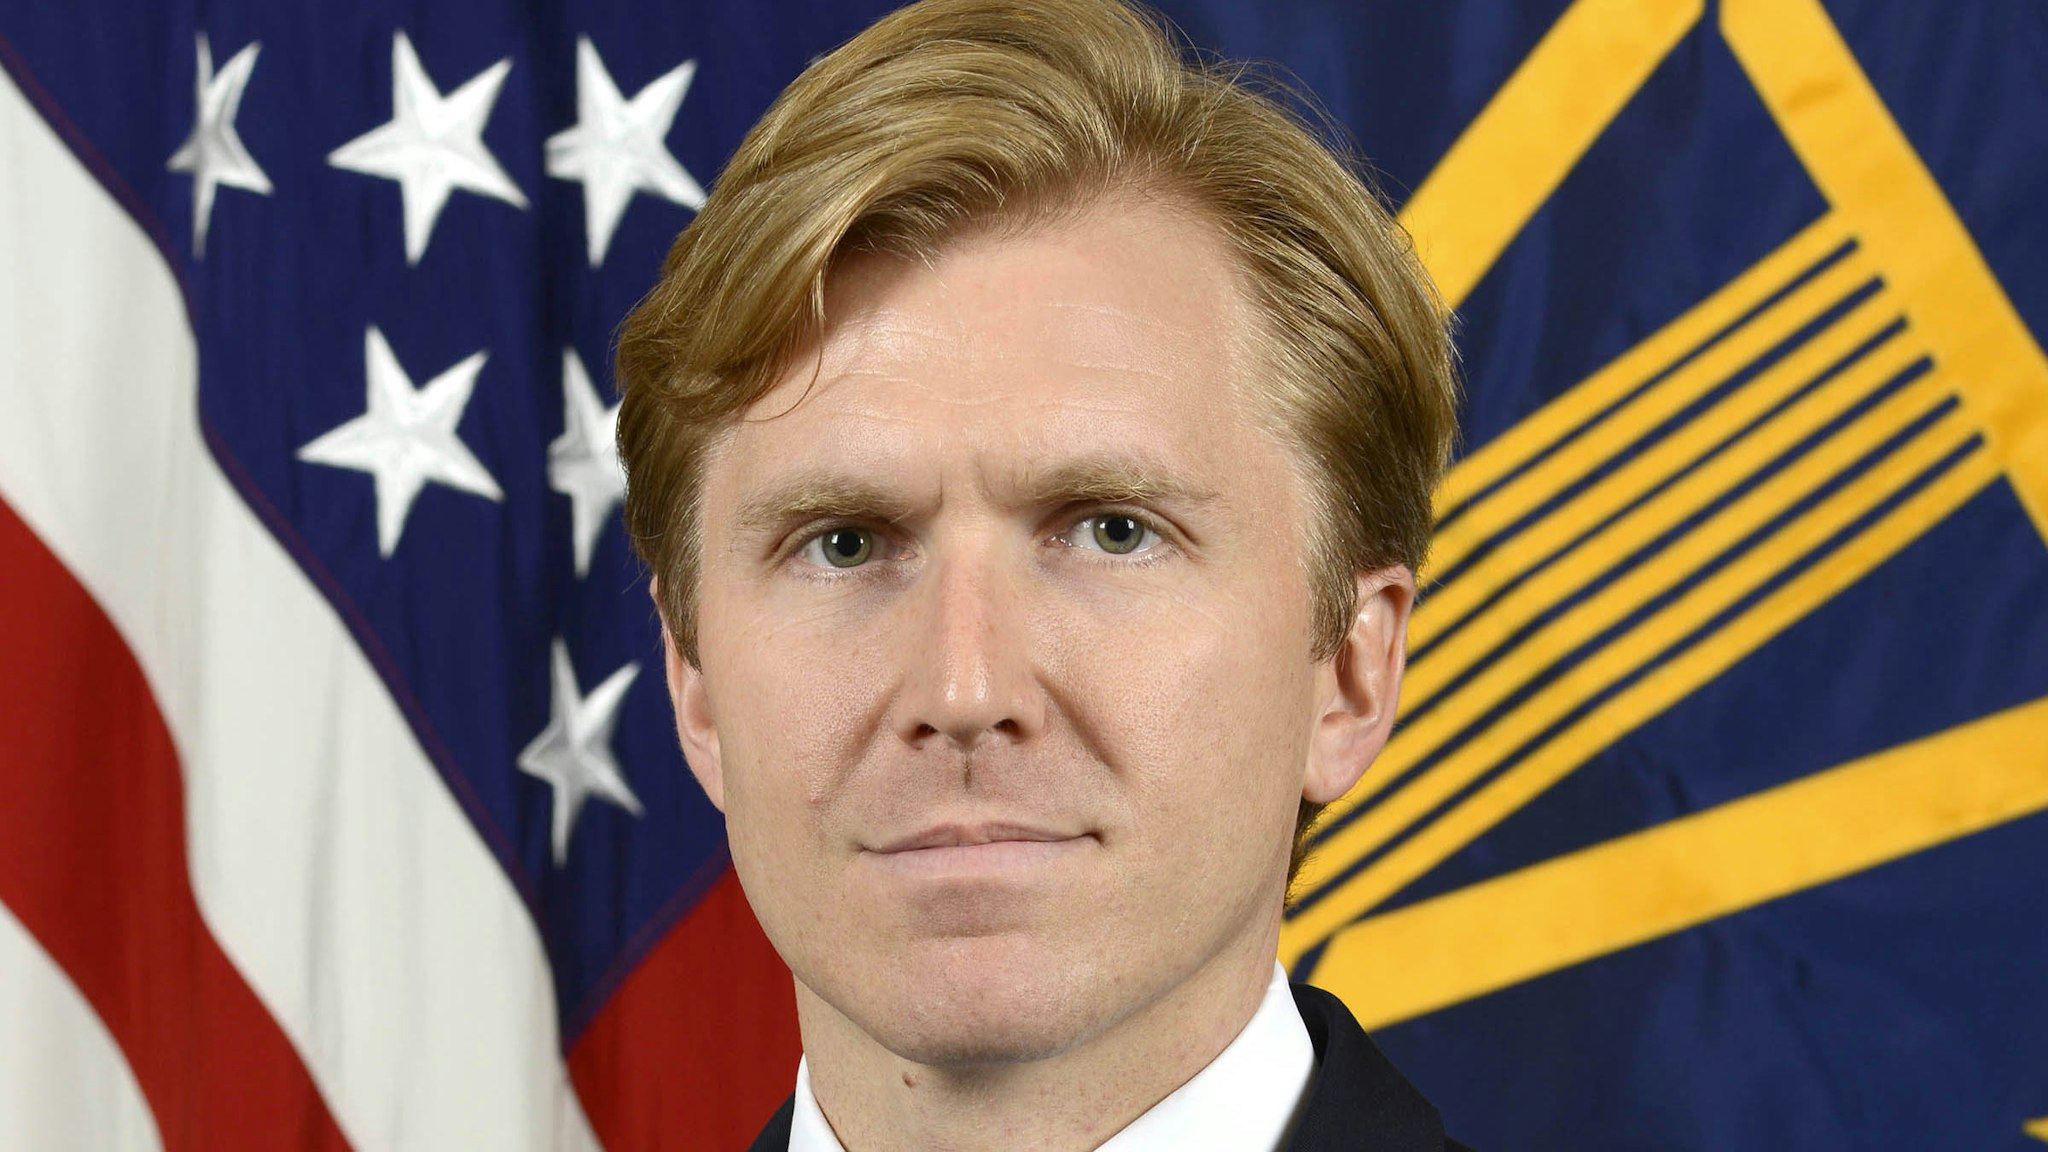 Elbridge Colby, Deputy Assistant Secretary of Defense, Strategy and Force Development, Department of Defense, poses for his official portrait in the Army portrait studio at the Pentagon in Arlington, Virginia, June 22, 2017.